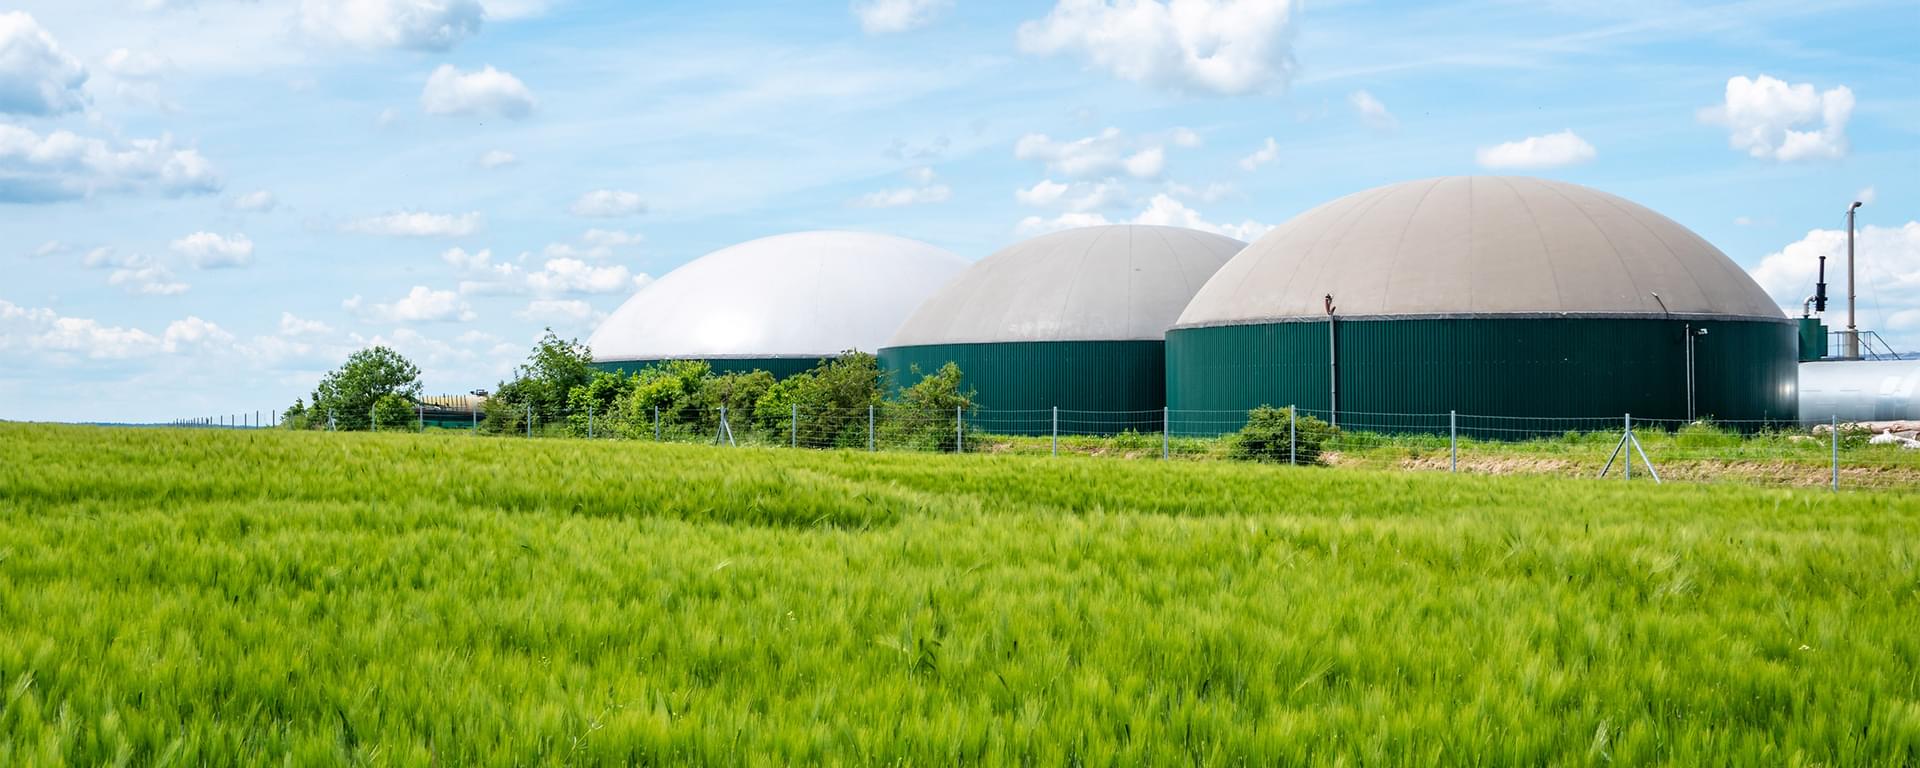 Biogas production plant with white domes in a grassy field